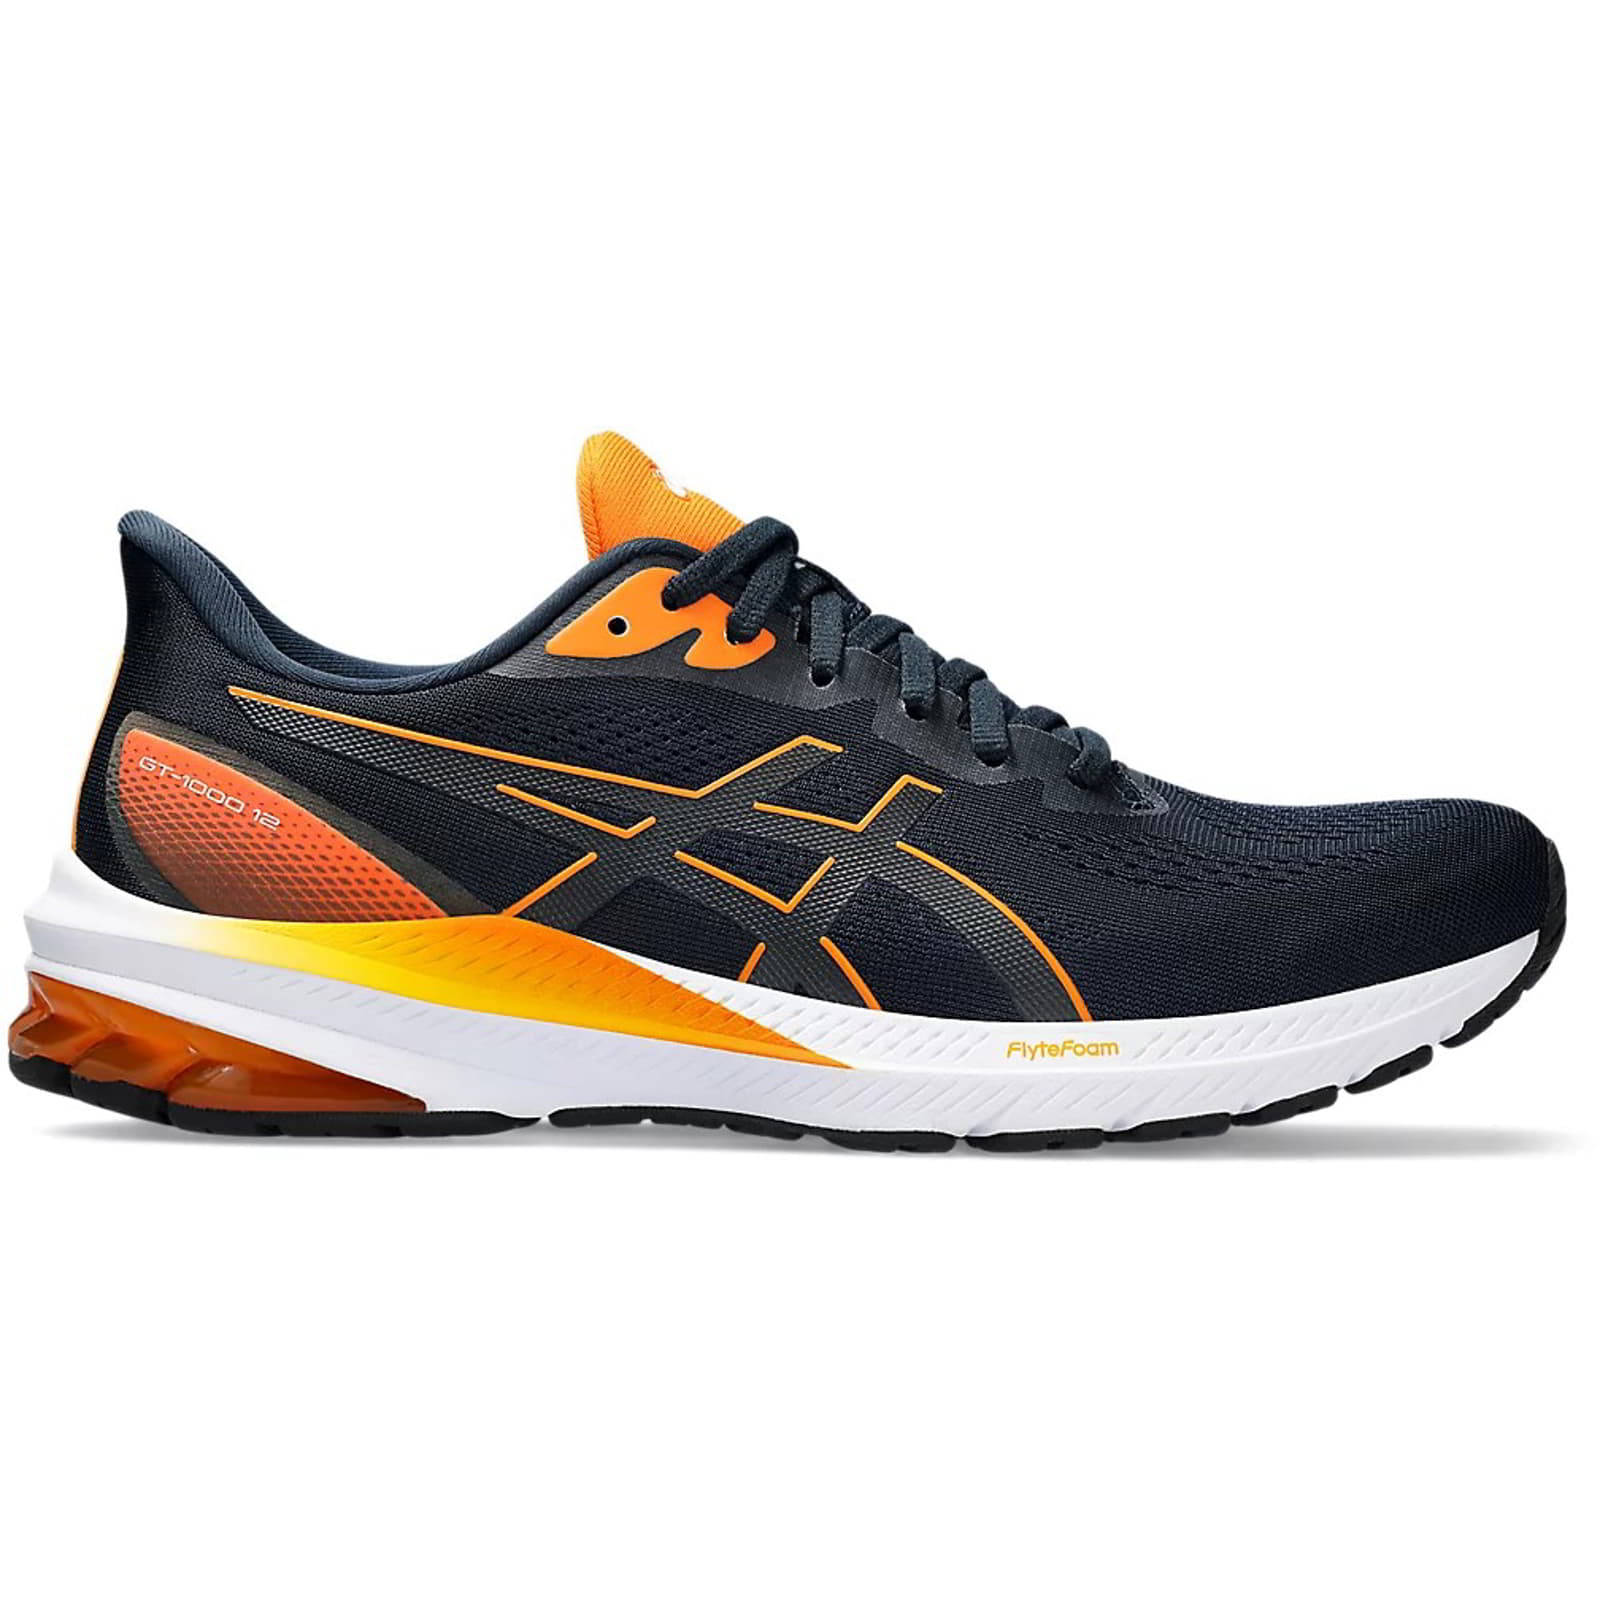 Asics Men's GT-1000 12 Running Shoes Trainers - UK 11